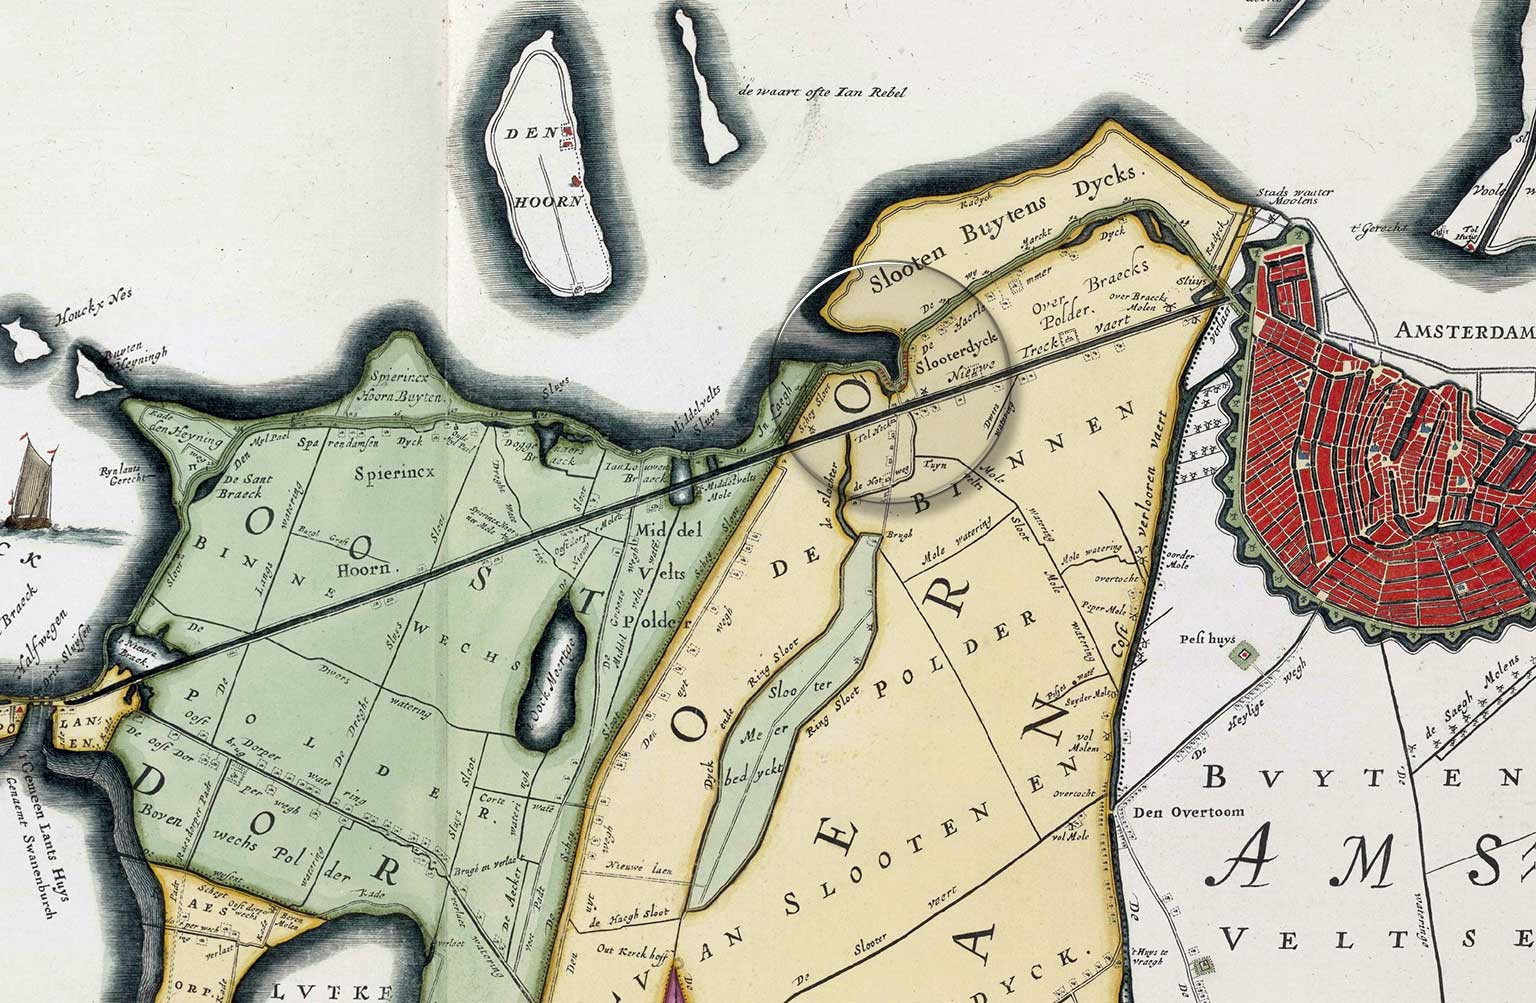 Village of Sloterdijk, Amsterdam, detail of a map from 1746